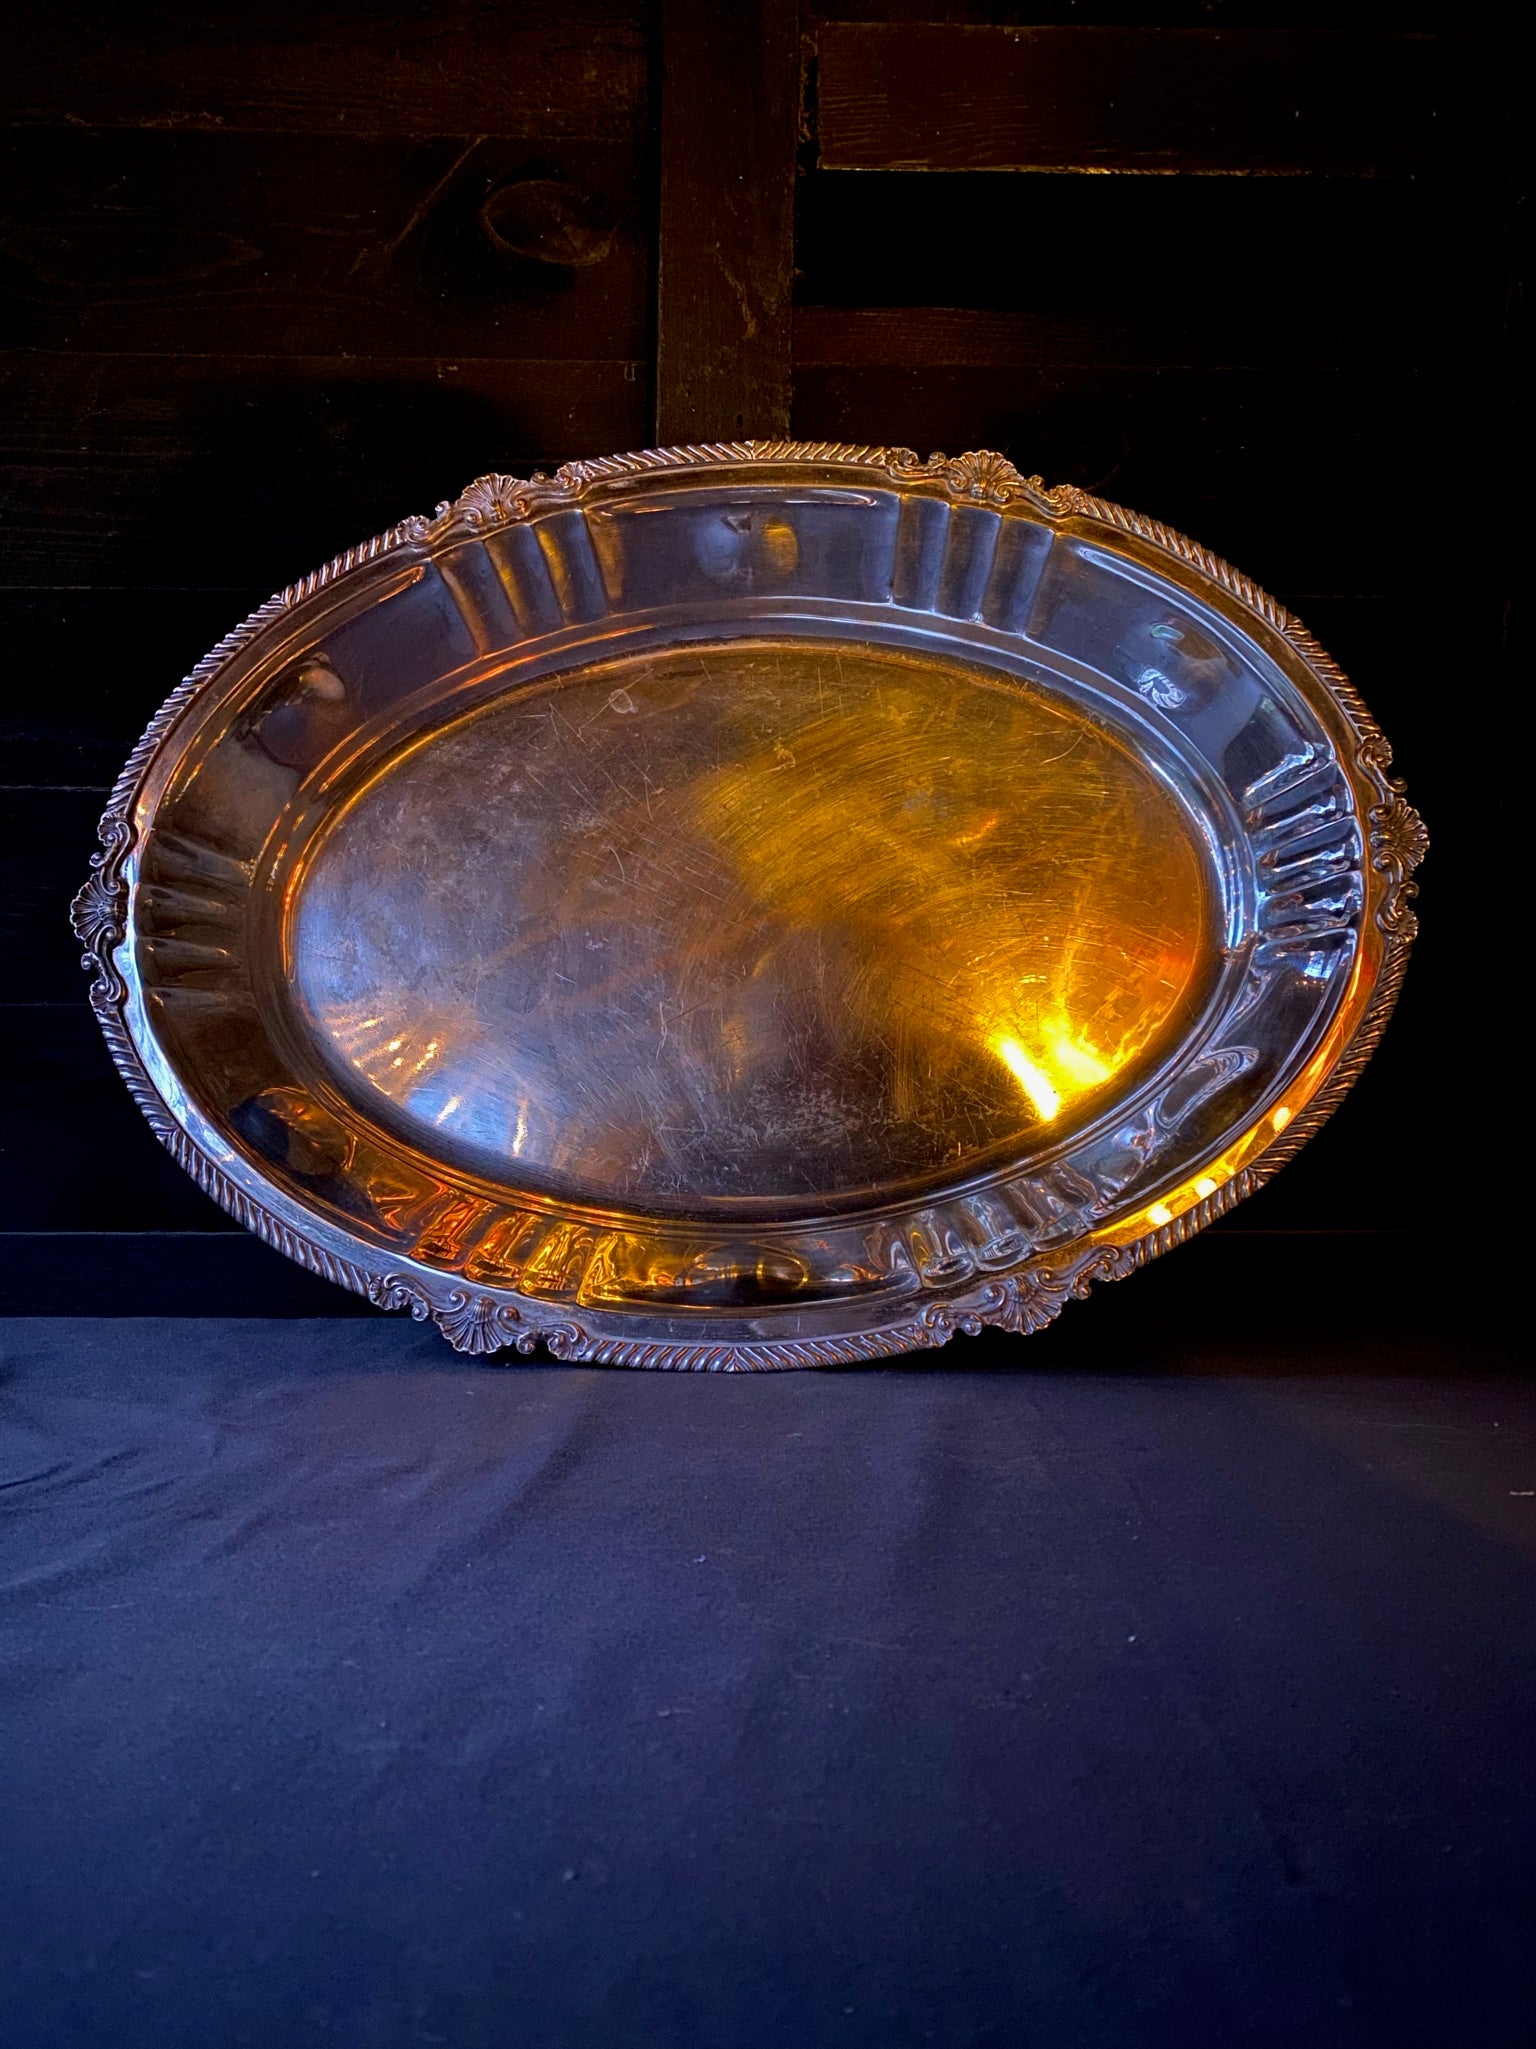 Large Plated Silver Deep Tray with Feet